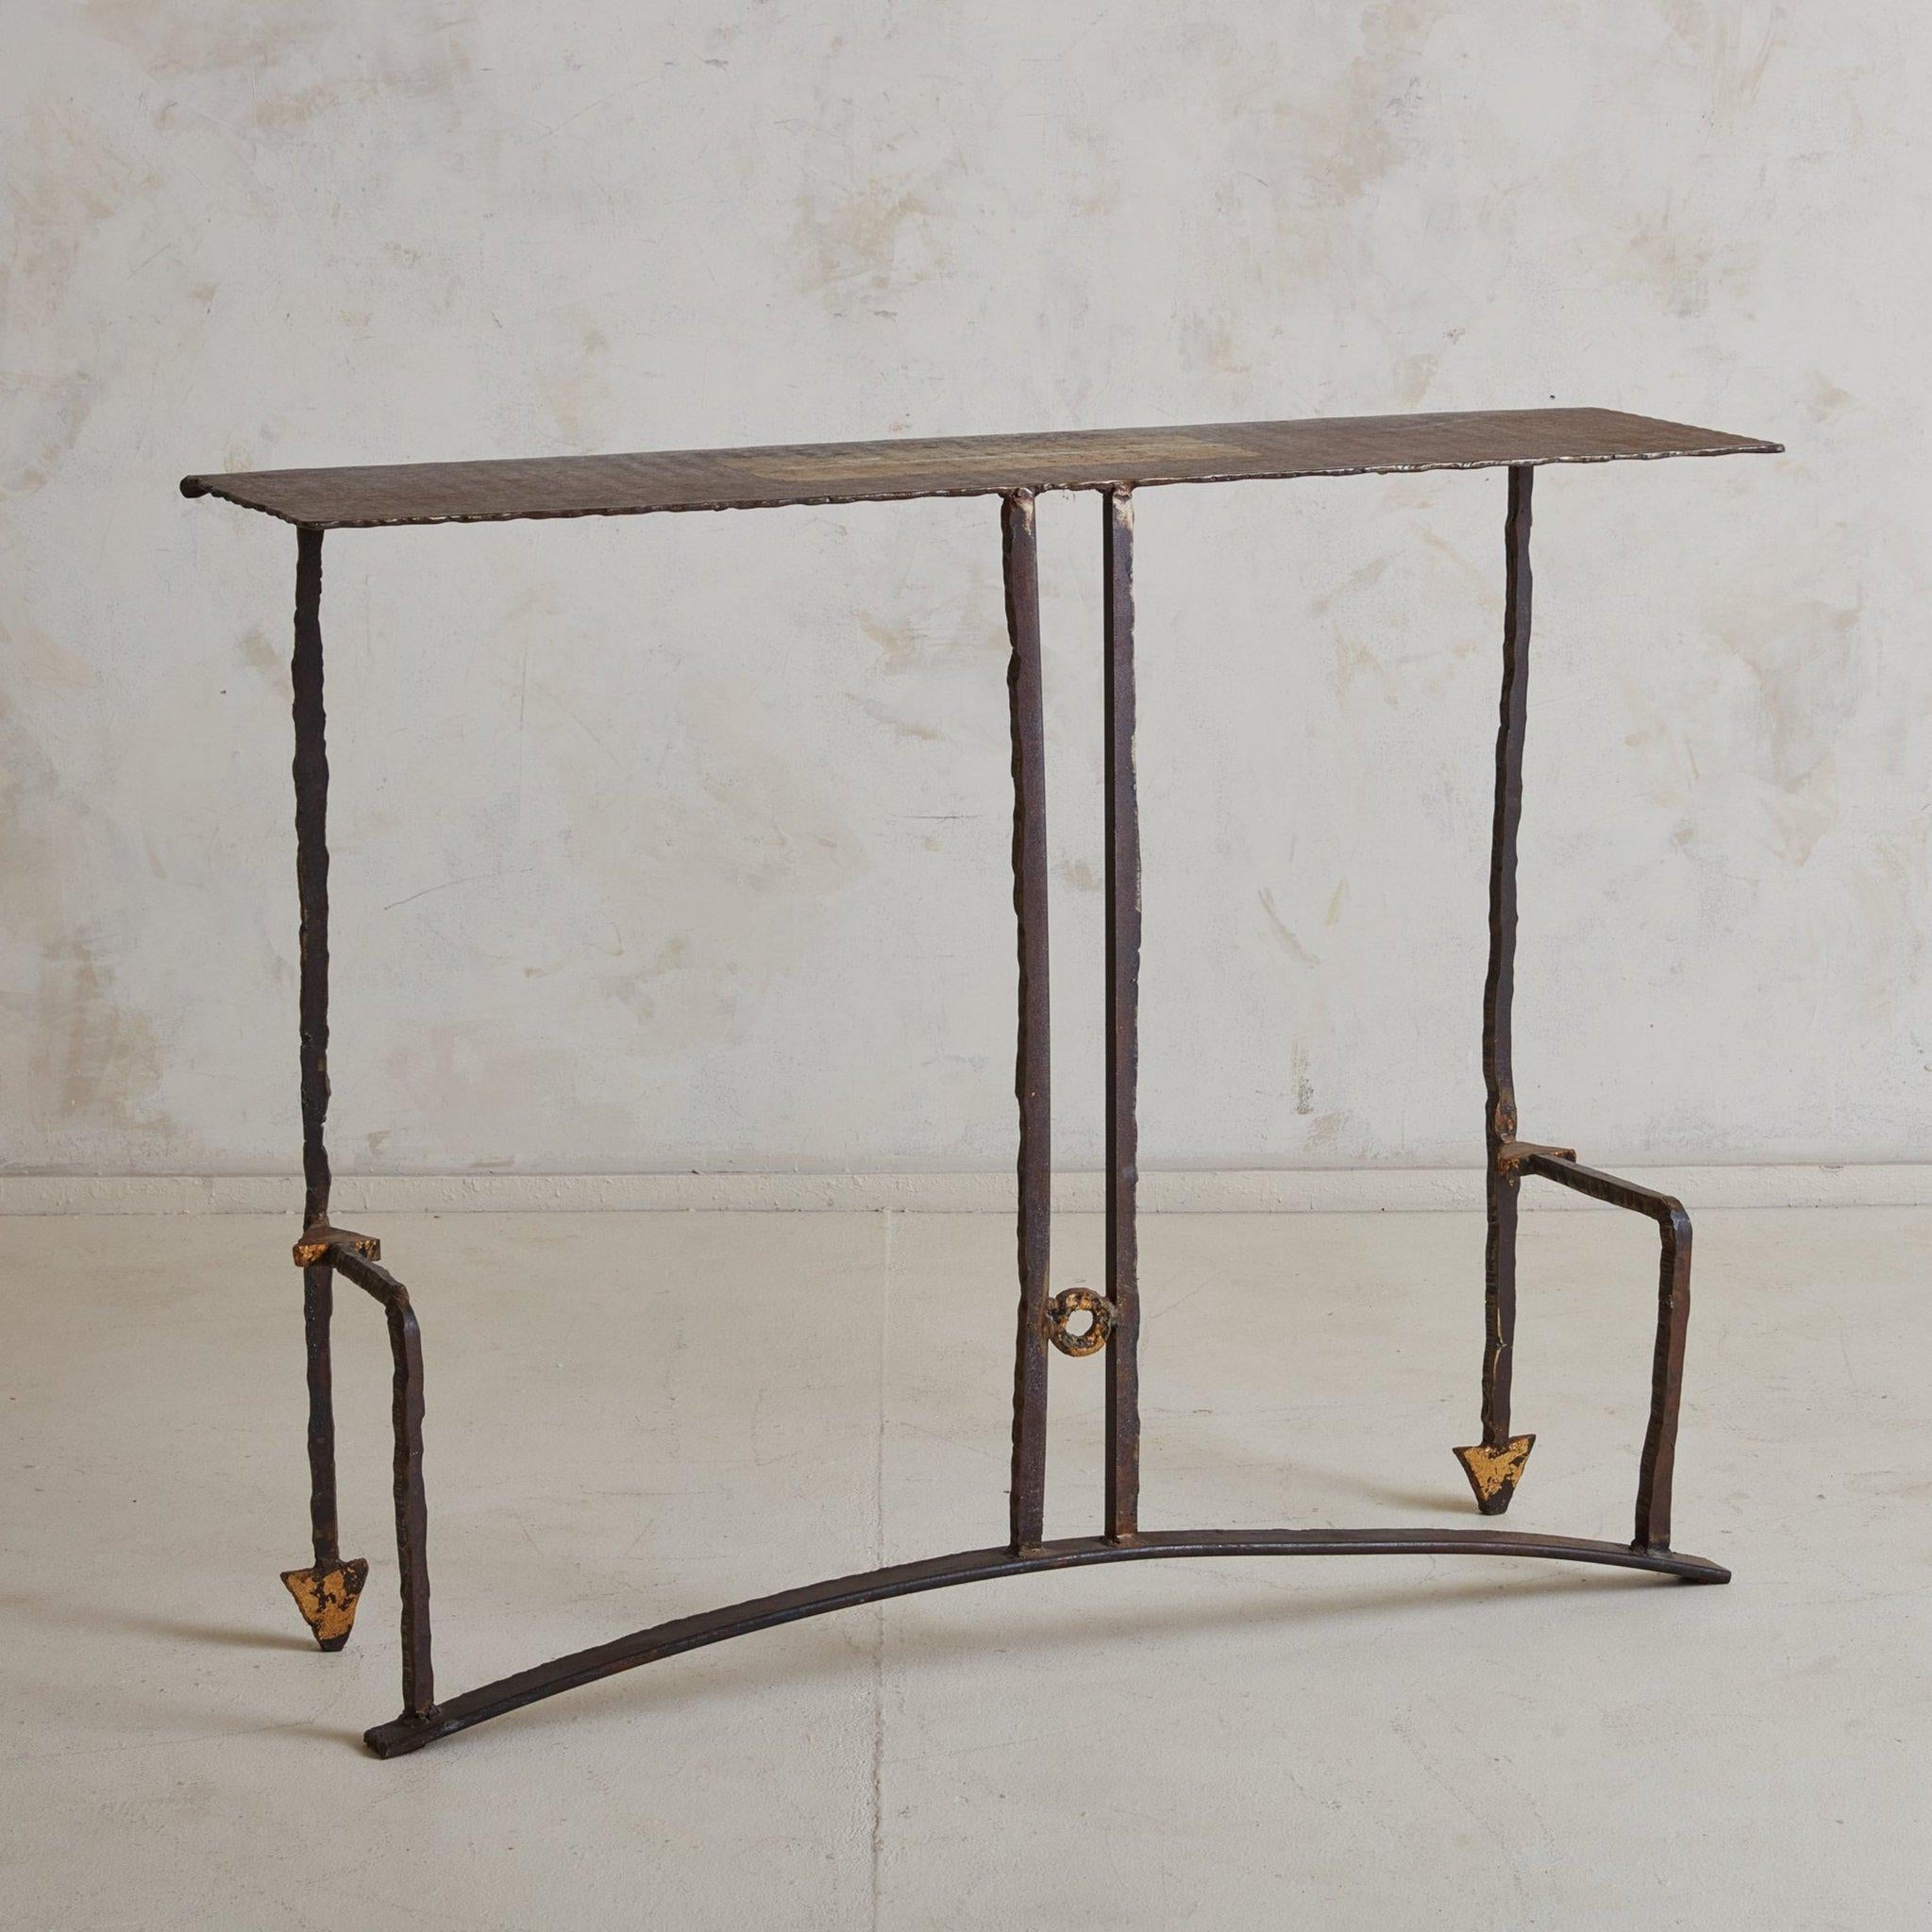 A brutalist French patinated wrought iron console table designed by Jean Jacques Argueyrolles (1954-). This sculptural console has a rectangular tabletop with four iron legs and an arched base. It has painted gold accents and features geometric